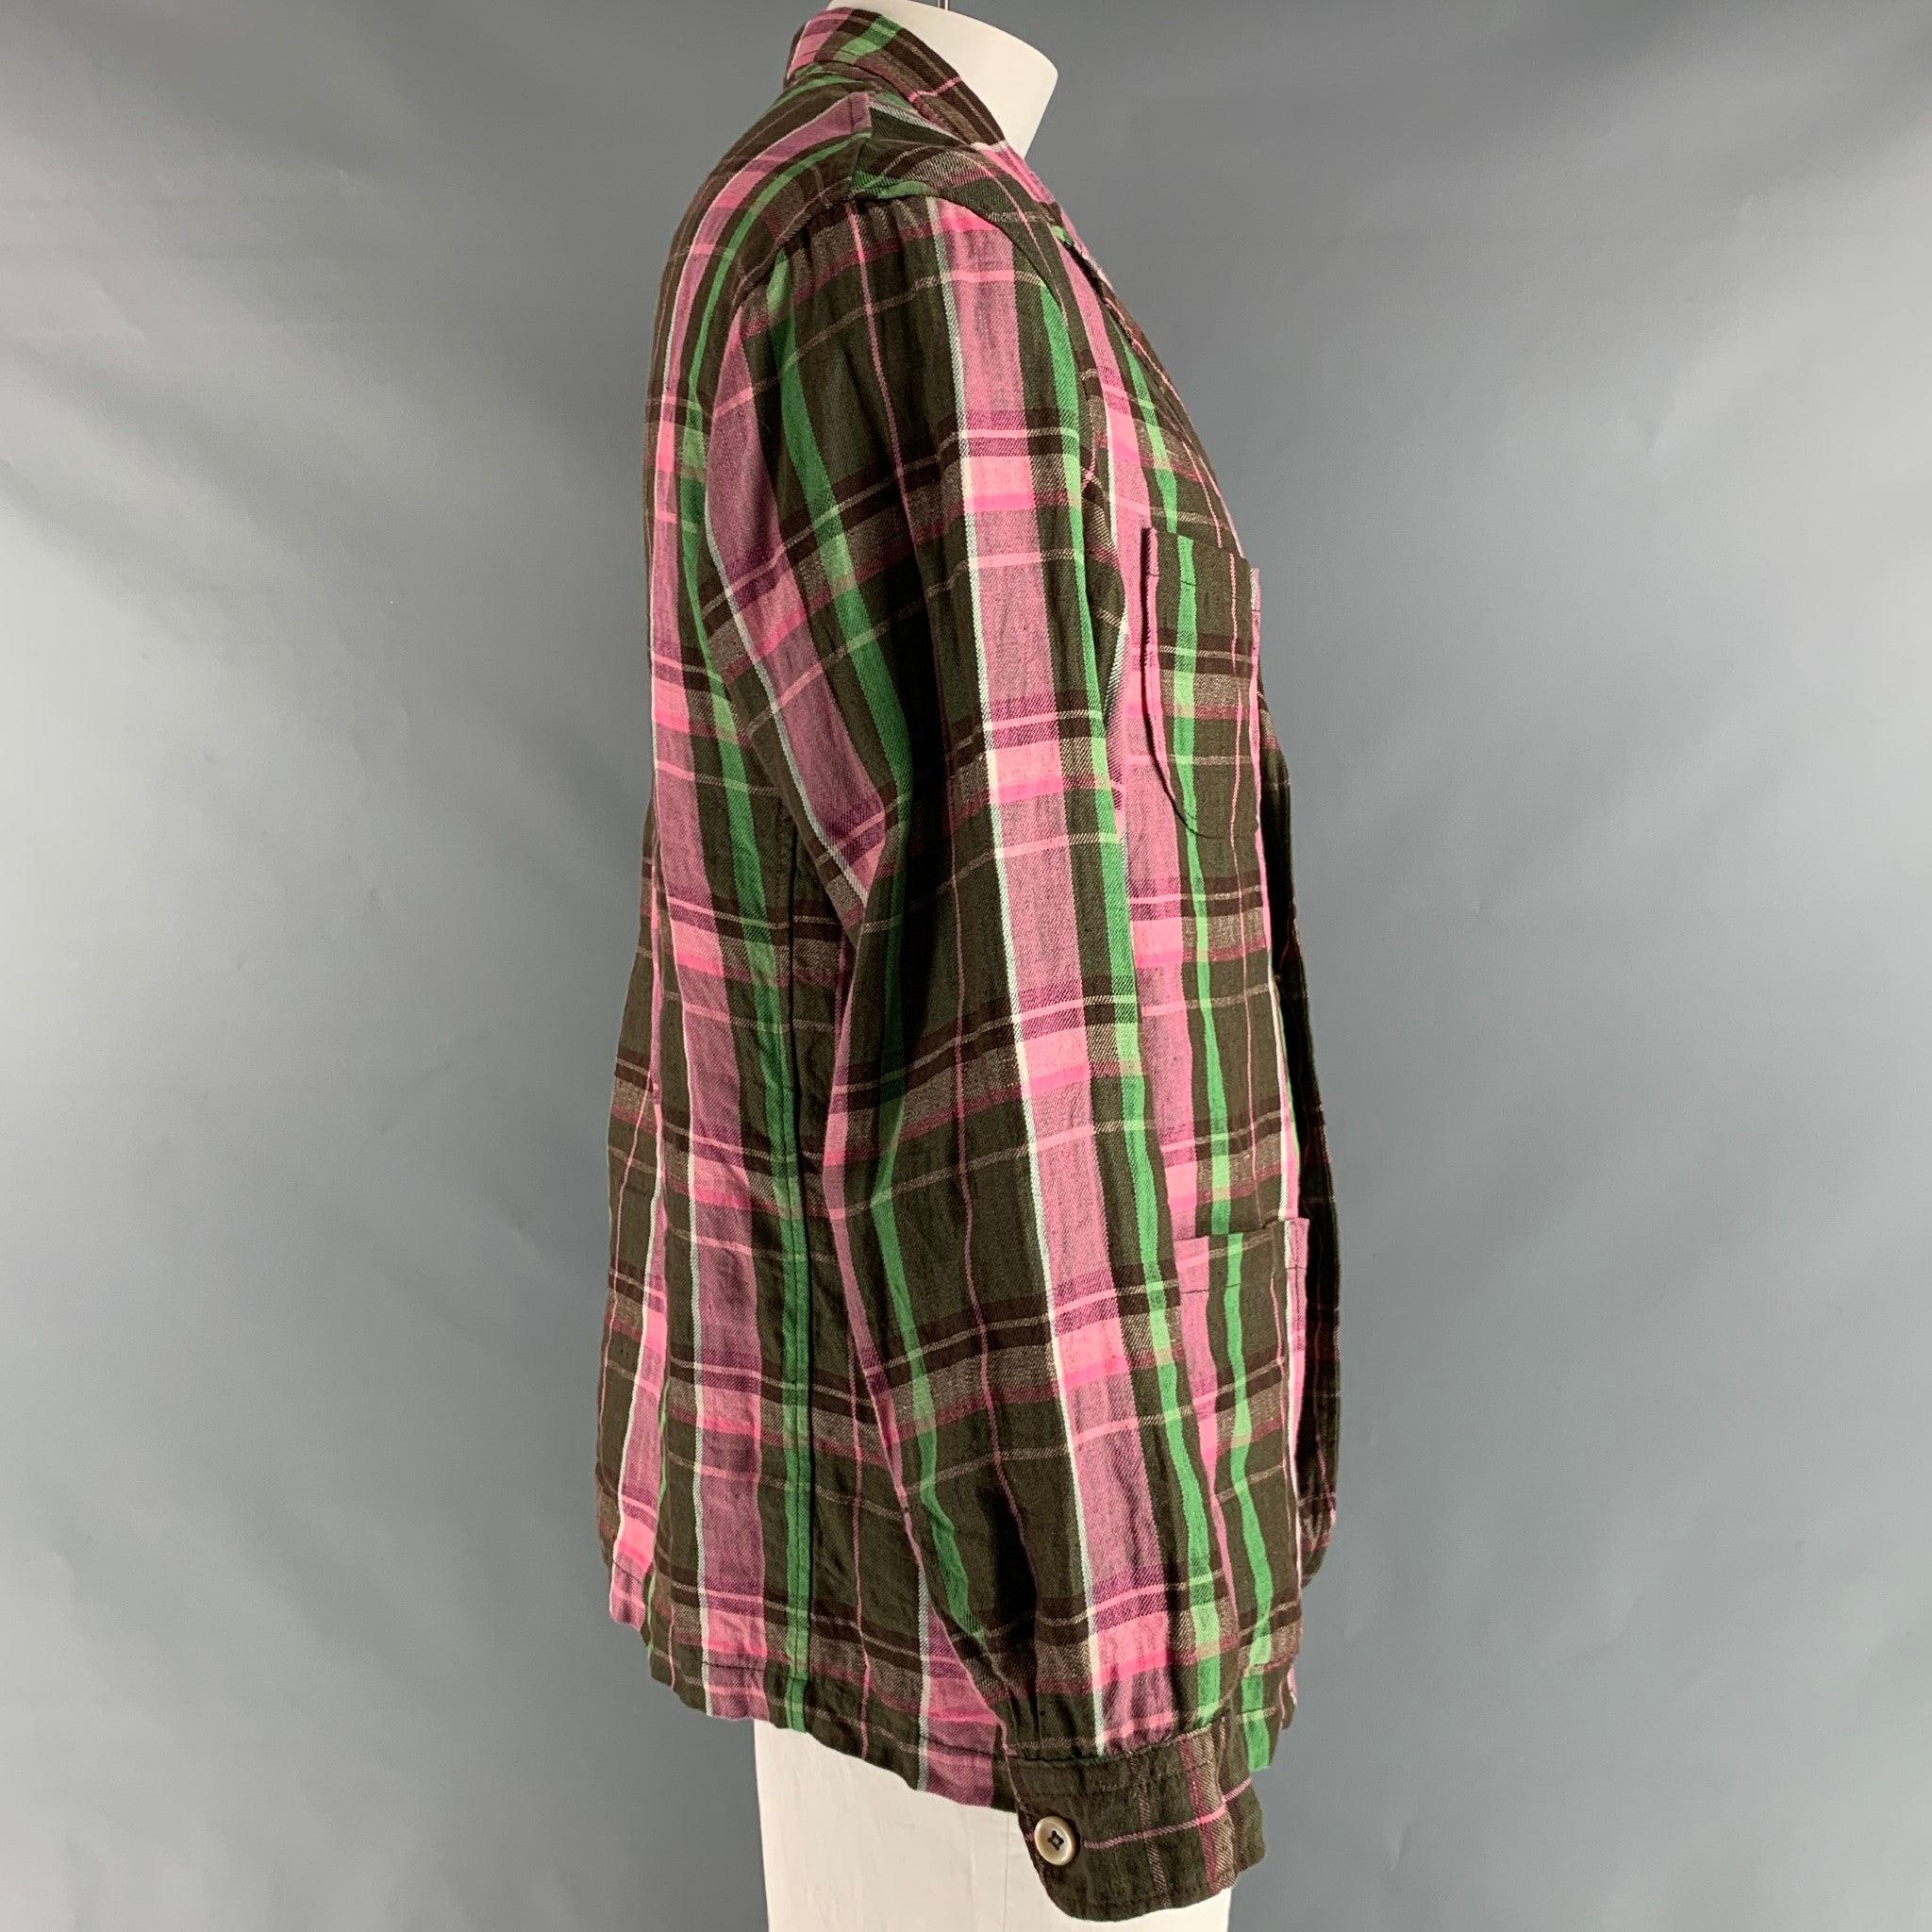 R13 jacket comes in a brown, pink and olive plaid linen woven material featuring a notch lapel, four patch pockets, and a button closure.Excellent Pre-Owned Condition. 

Marked:   04 

Measurements: 
 
Shoulder: 20 inches Chest: 45 inches Sleeve: 25